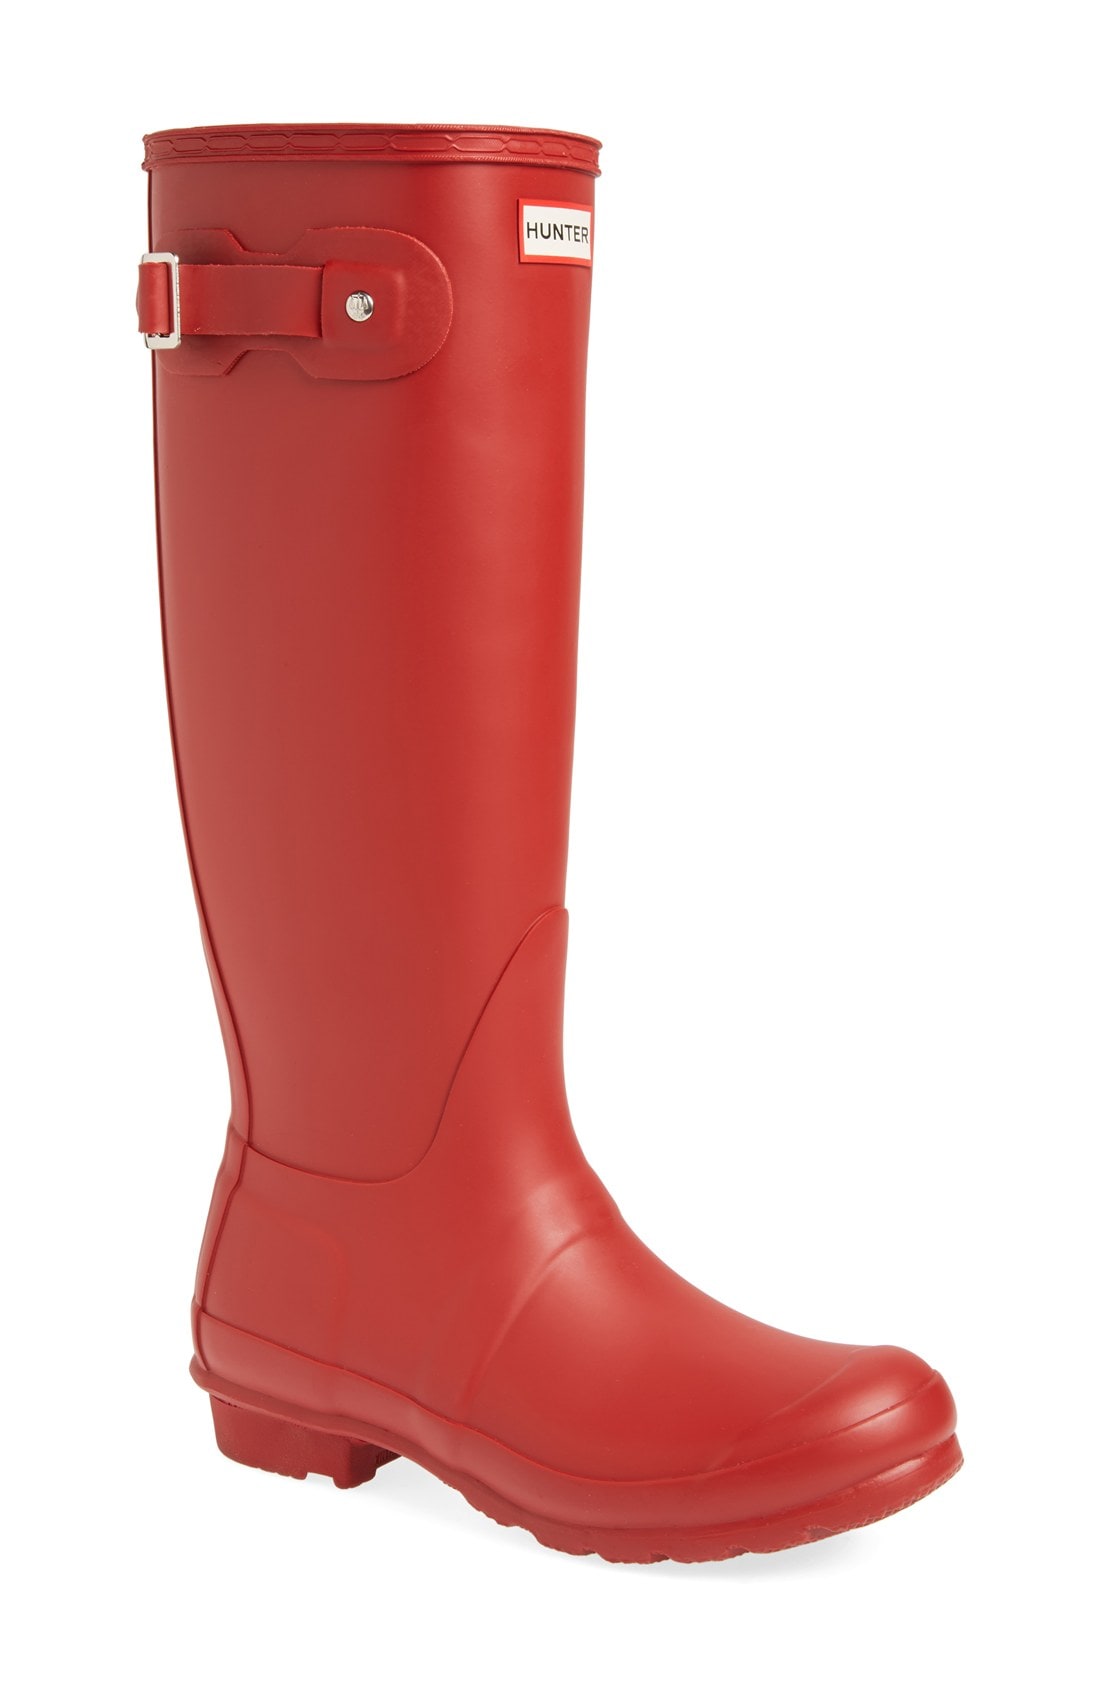 Women's Red Boots | Nordstrom